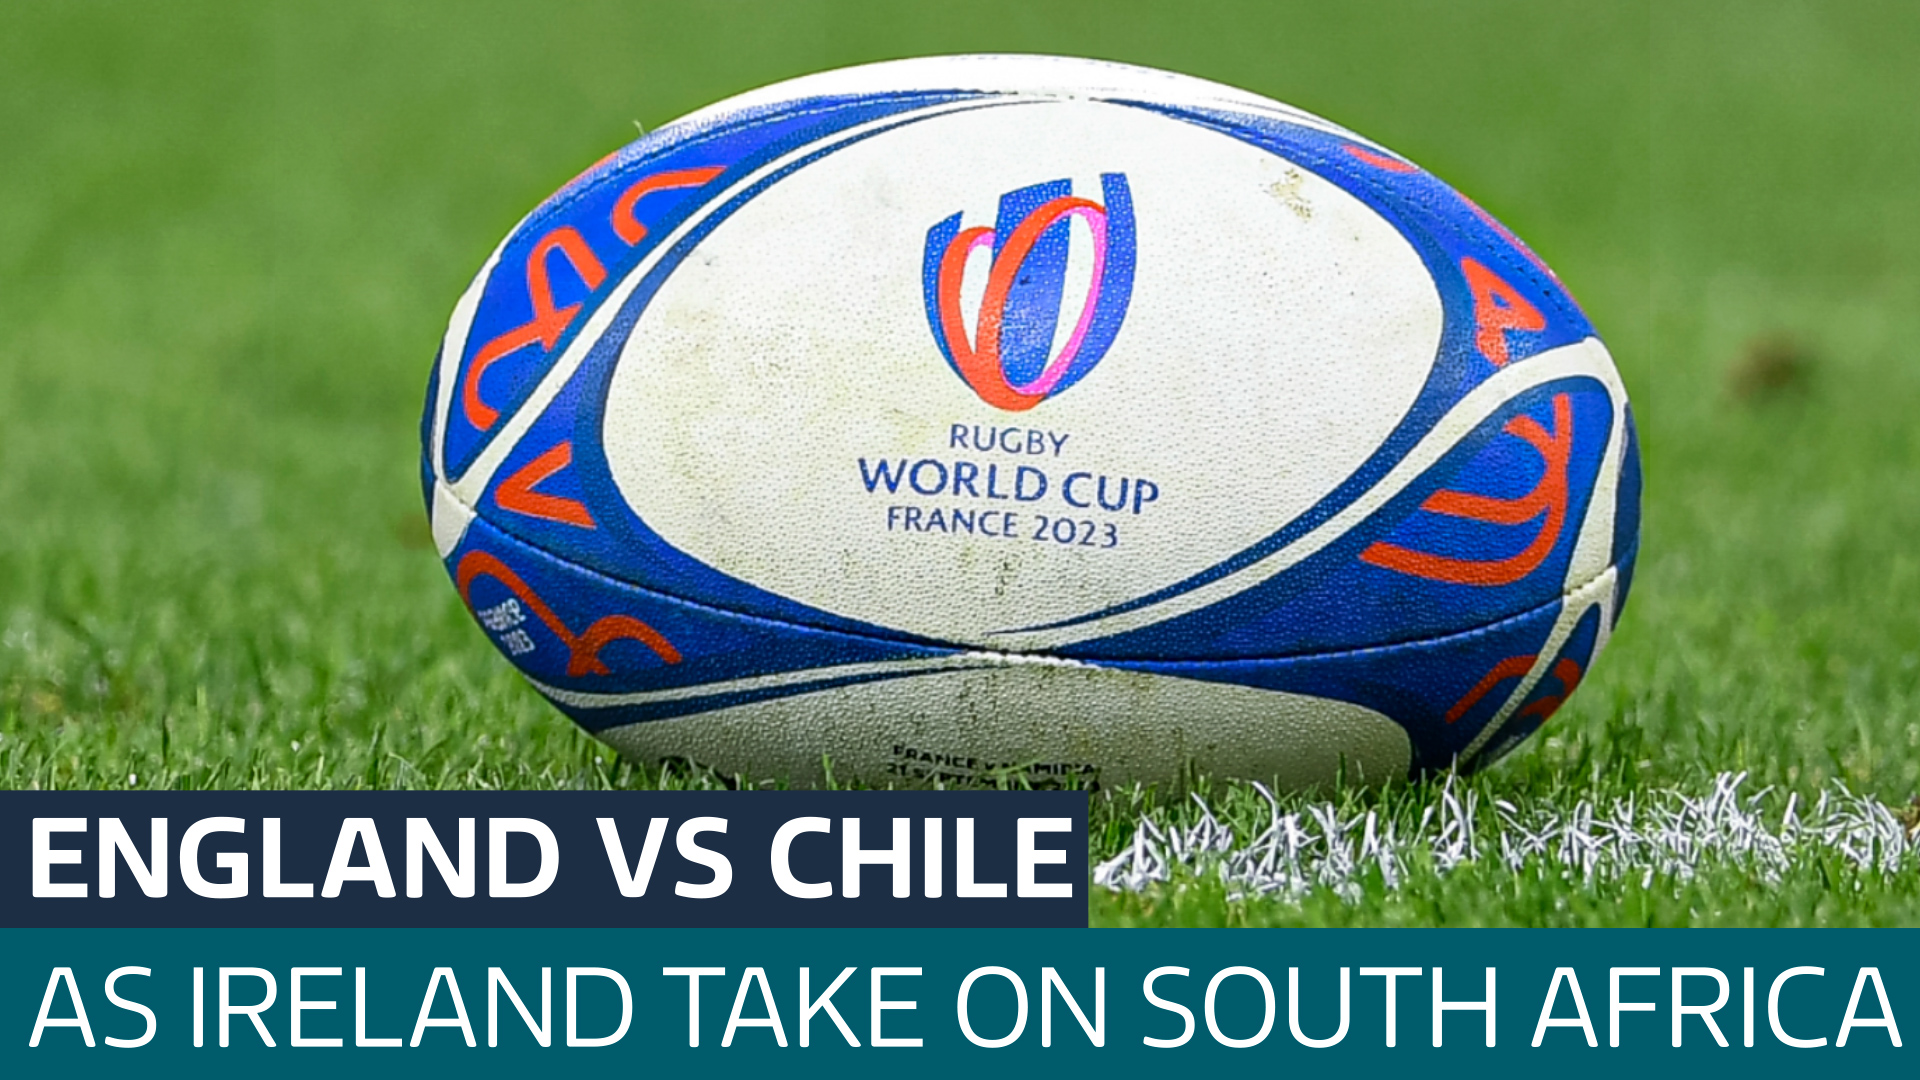 Rugby World Cup showdown England take on Chile as Ireland play South Africa 